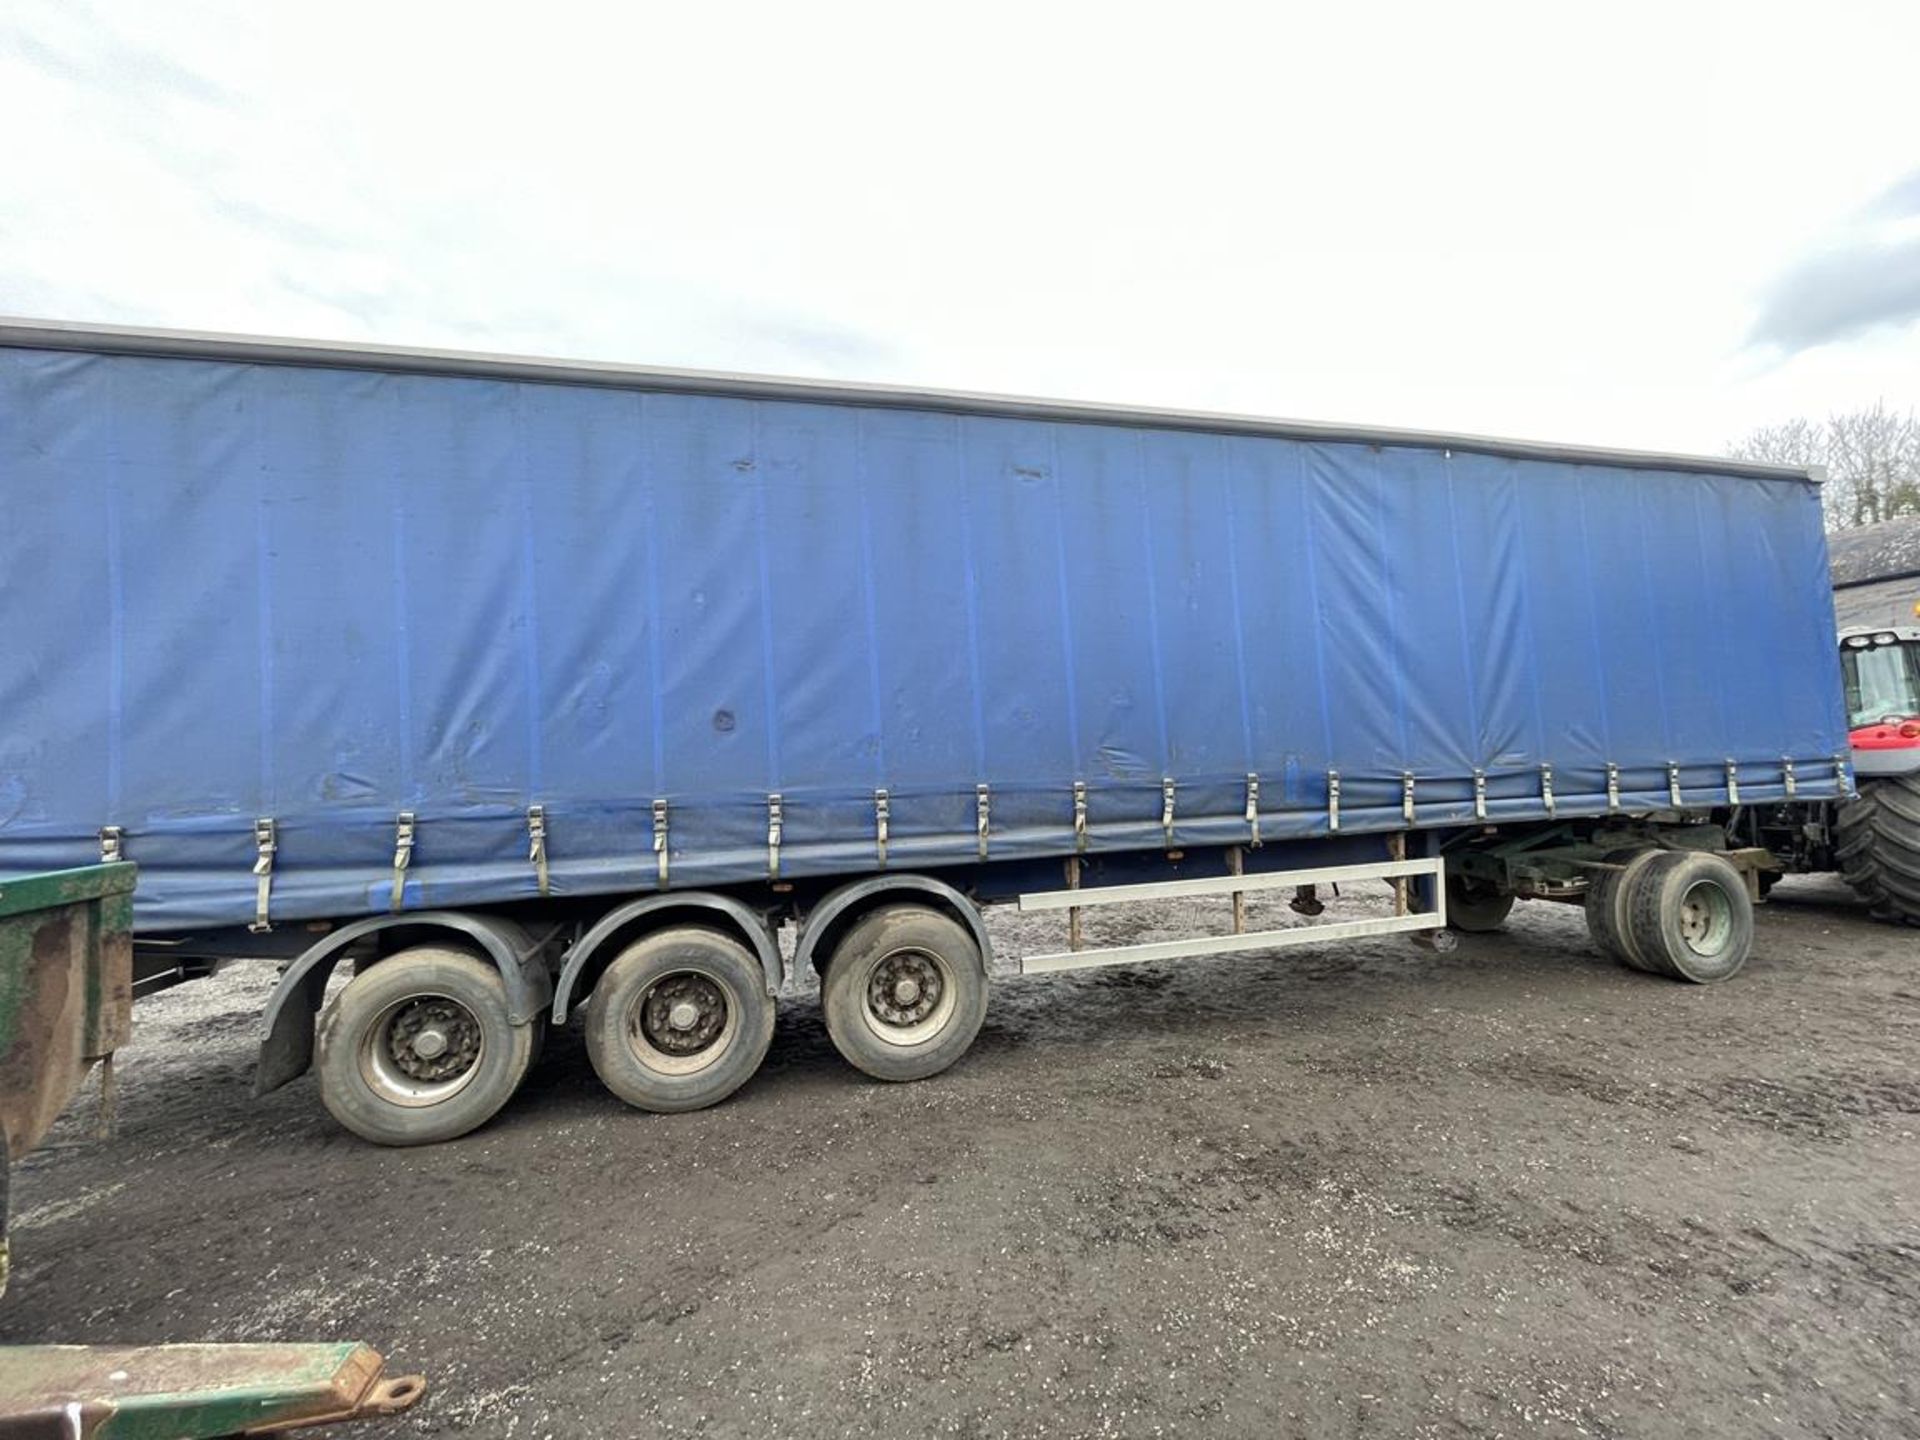 2006 Montracon EB+ ADR 25/2M Triple Axle Curtainside Trailer, VIN: 24688 with Rear Barn Doors. - Image 7 of 12